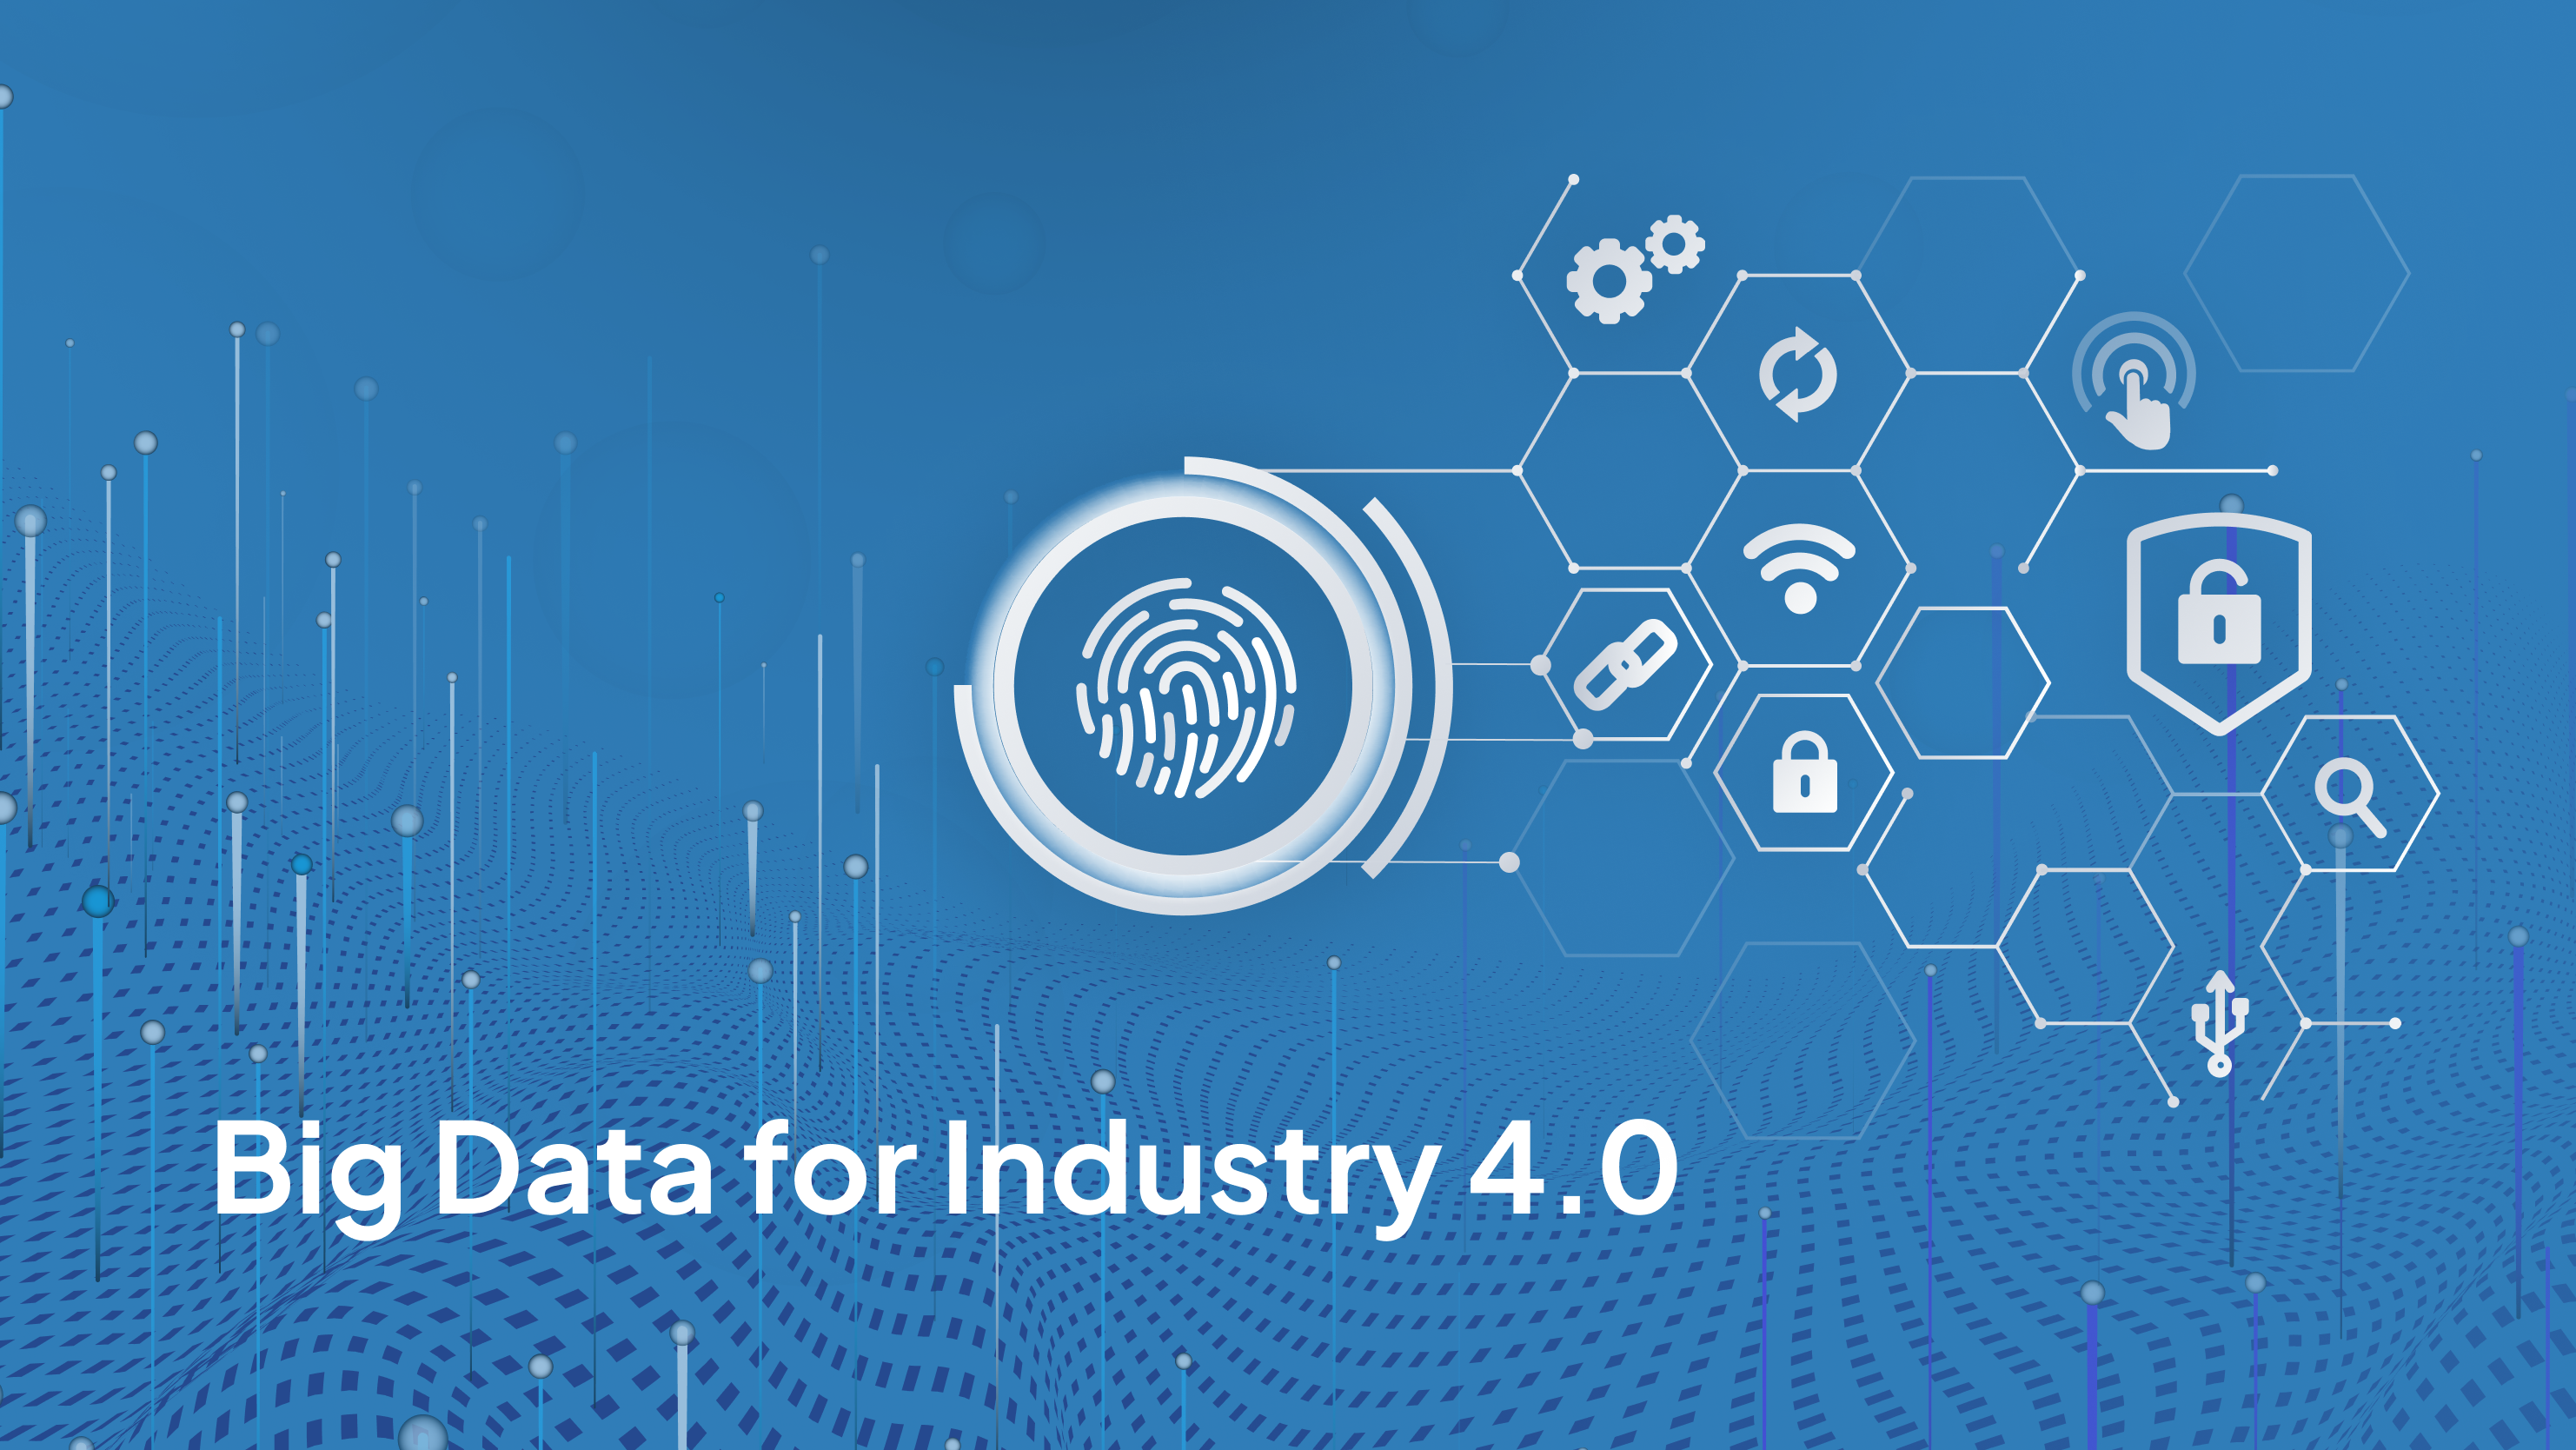 big data for industry 4.0